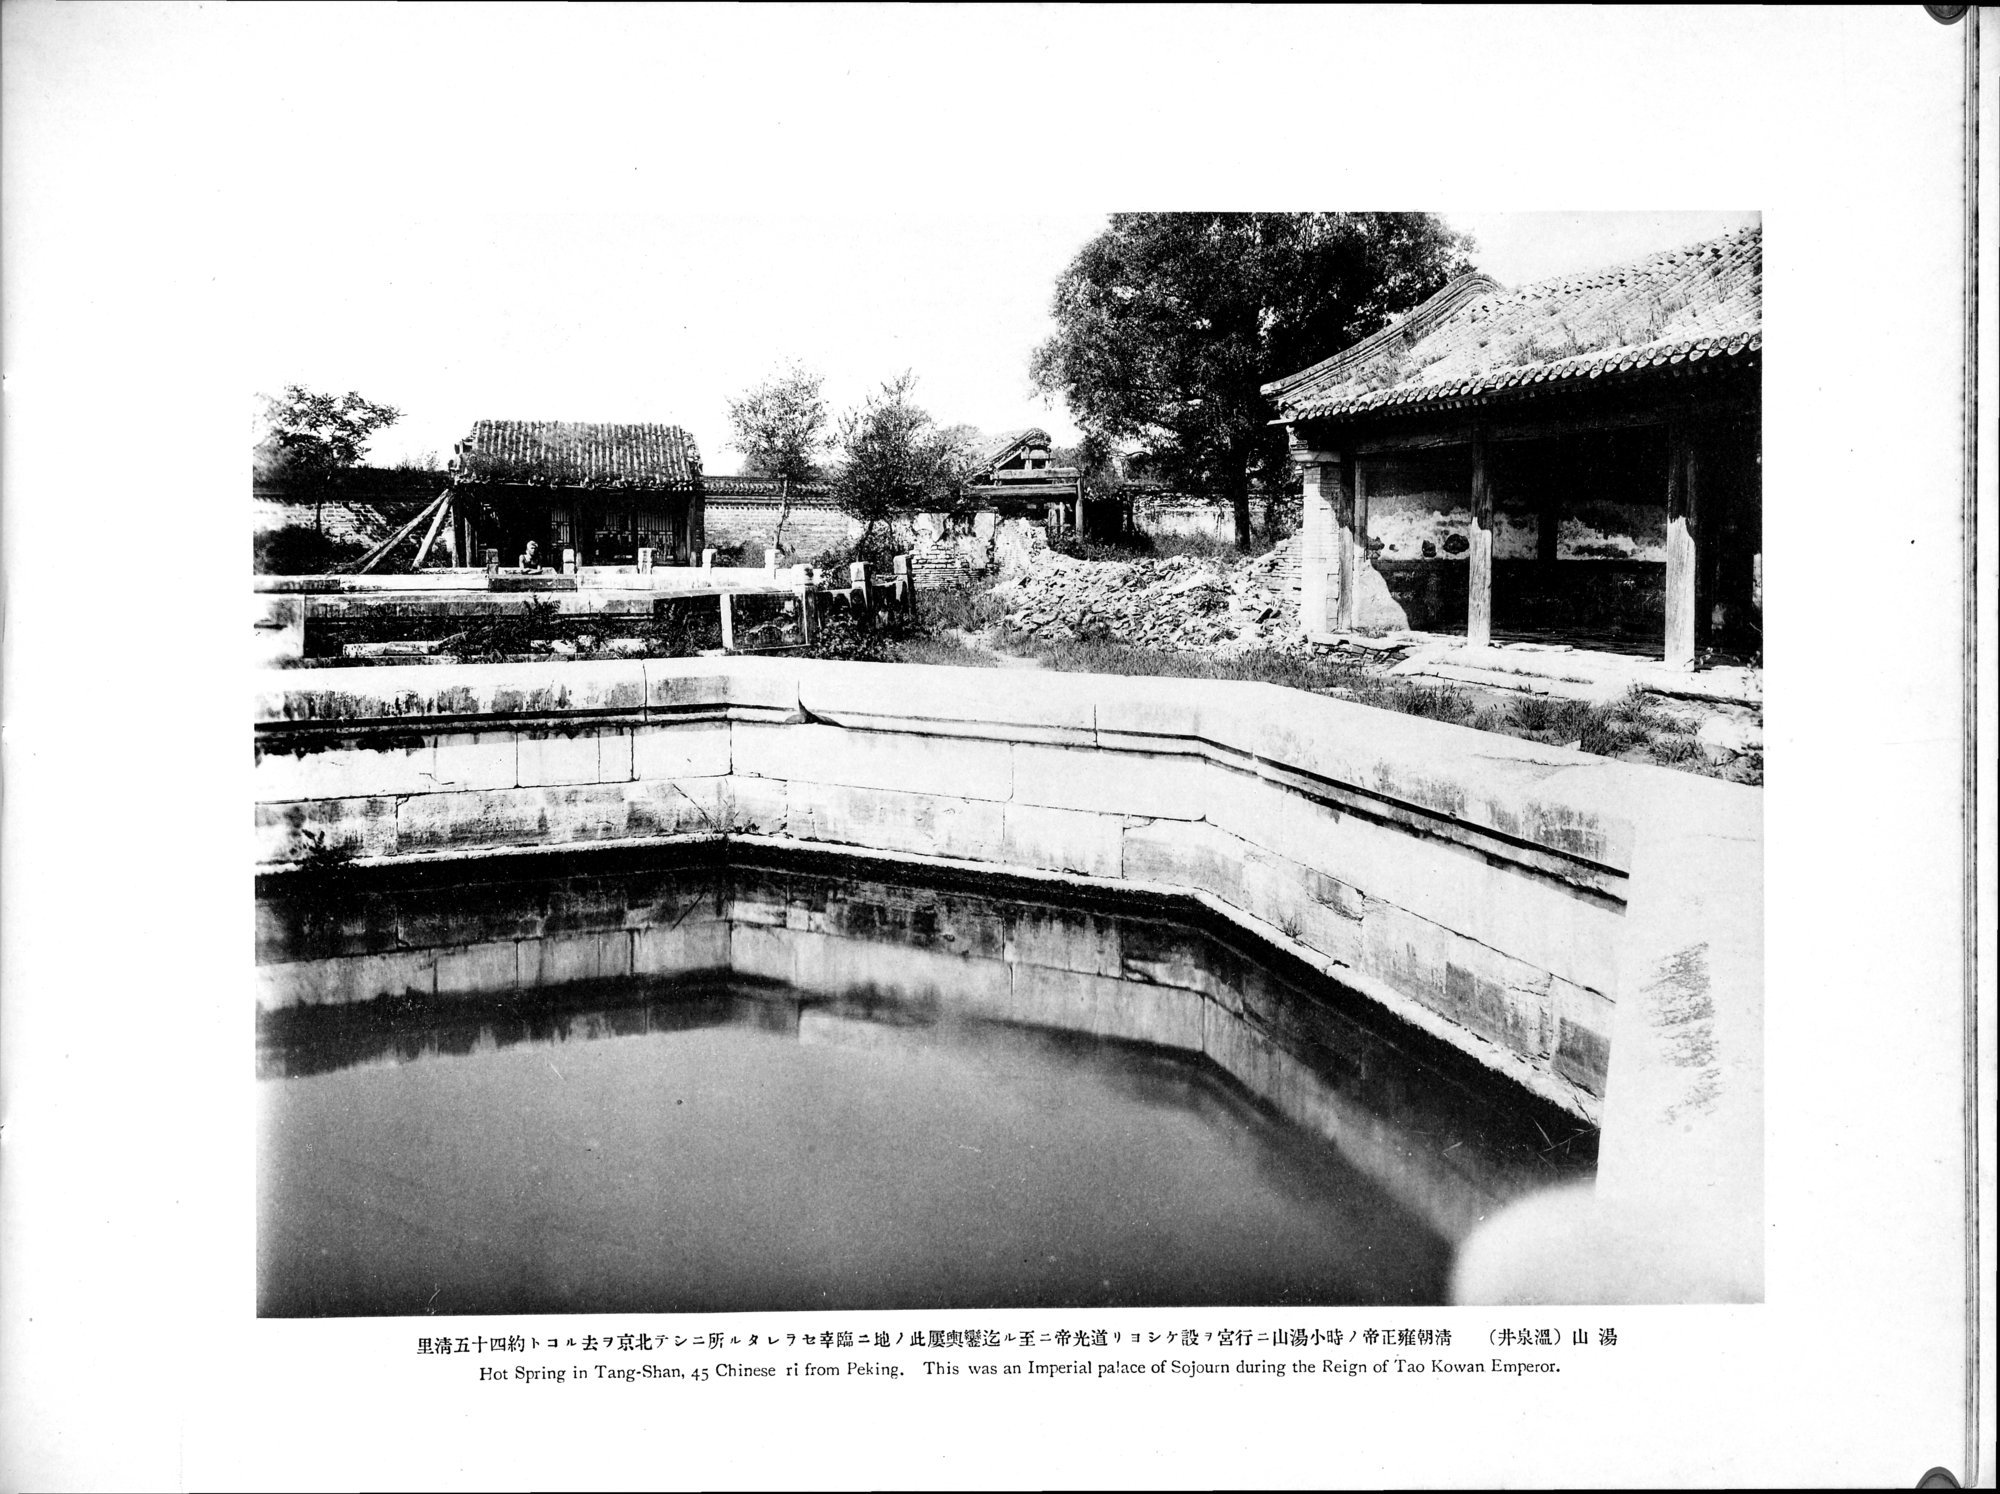 Views and Custom of North China : vol.1 / Page 193 (Grayscale High Resolution Image)